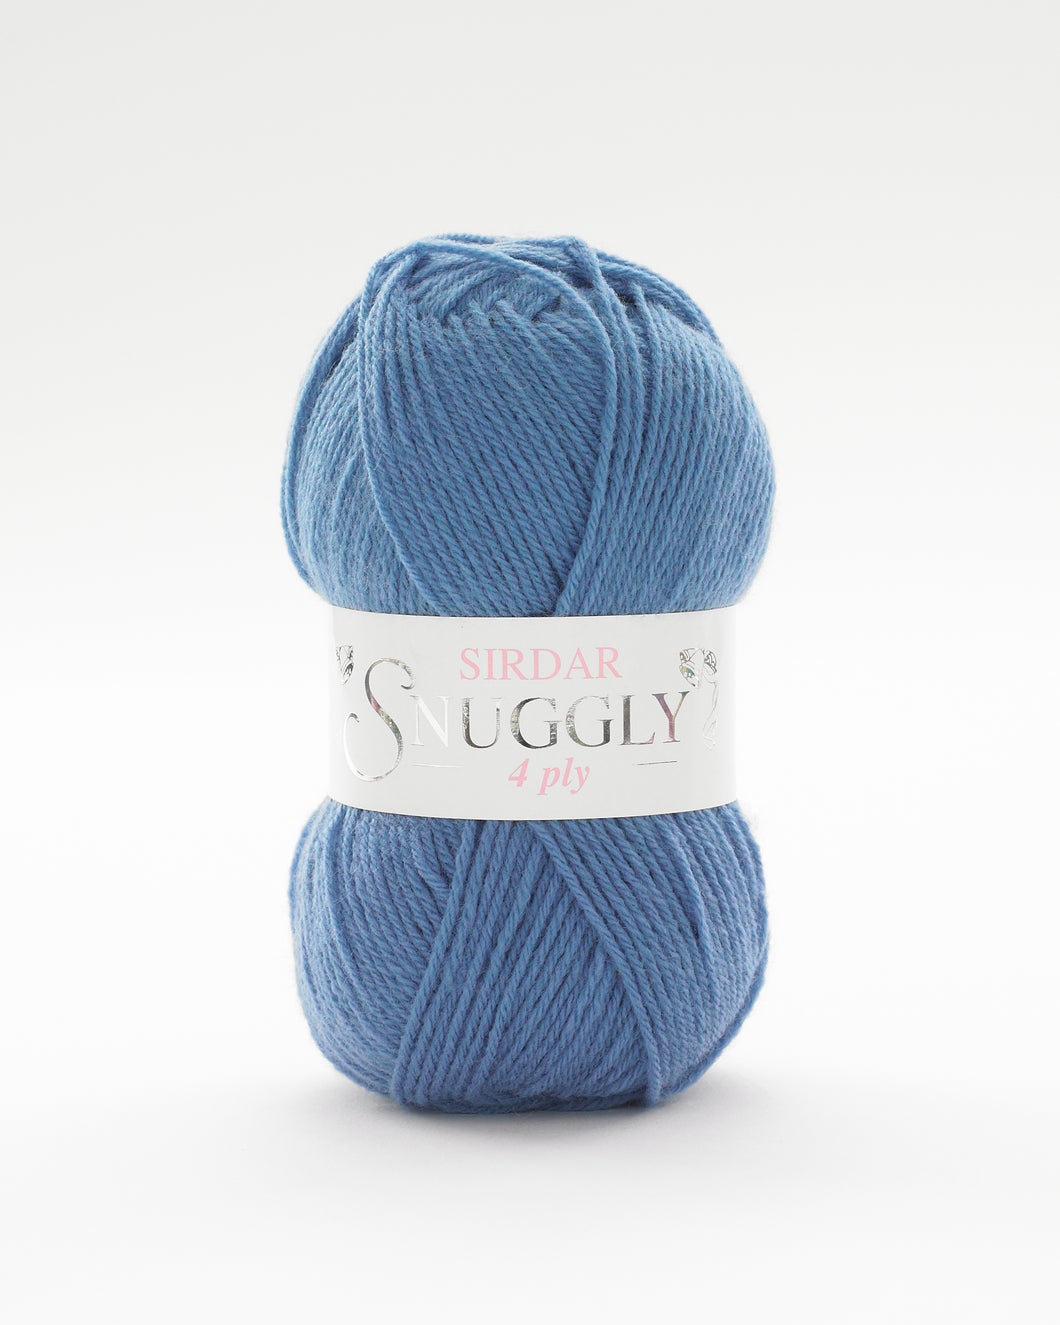 Snuggly 4 Ply 50gm